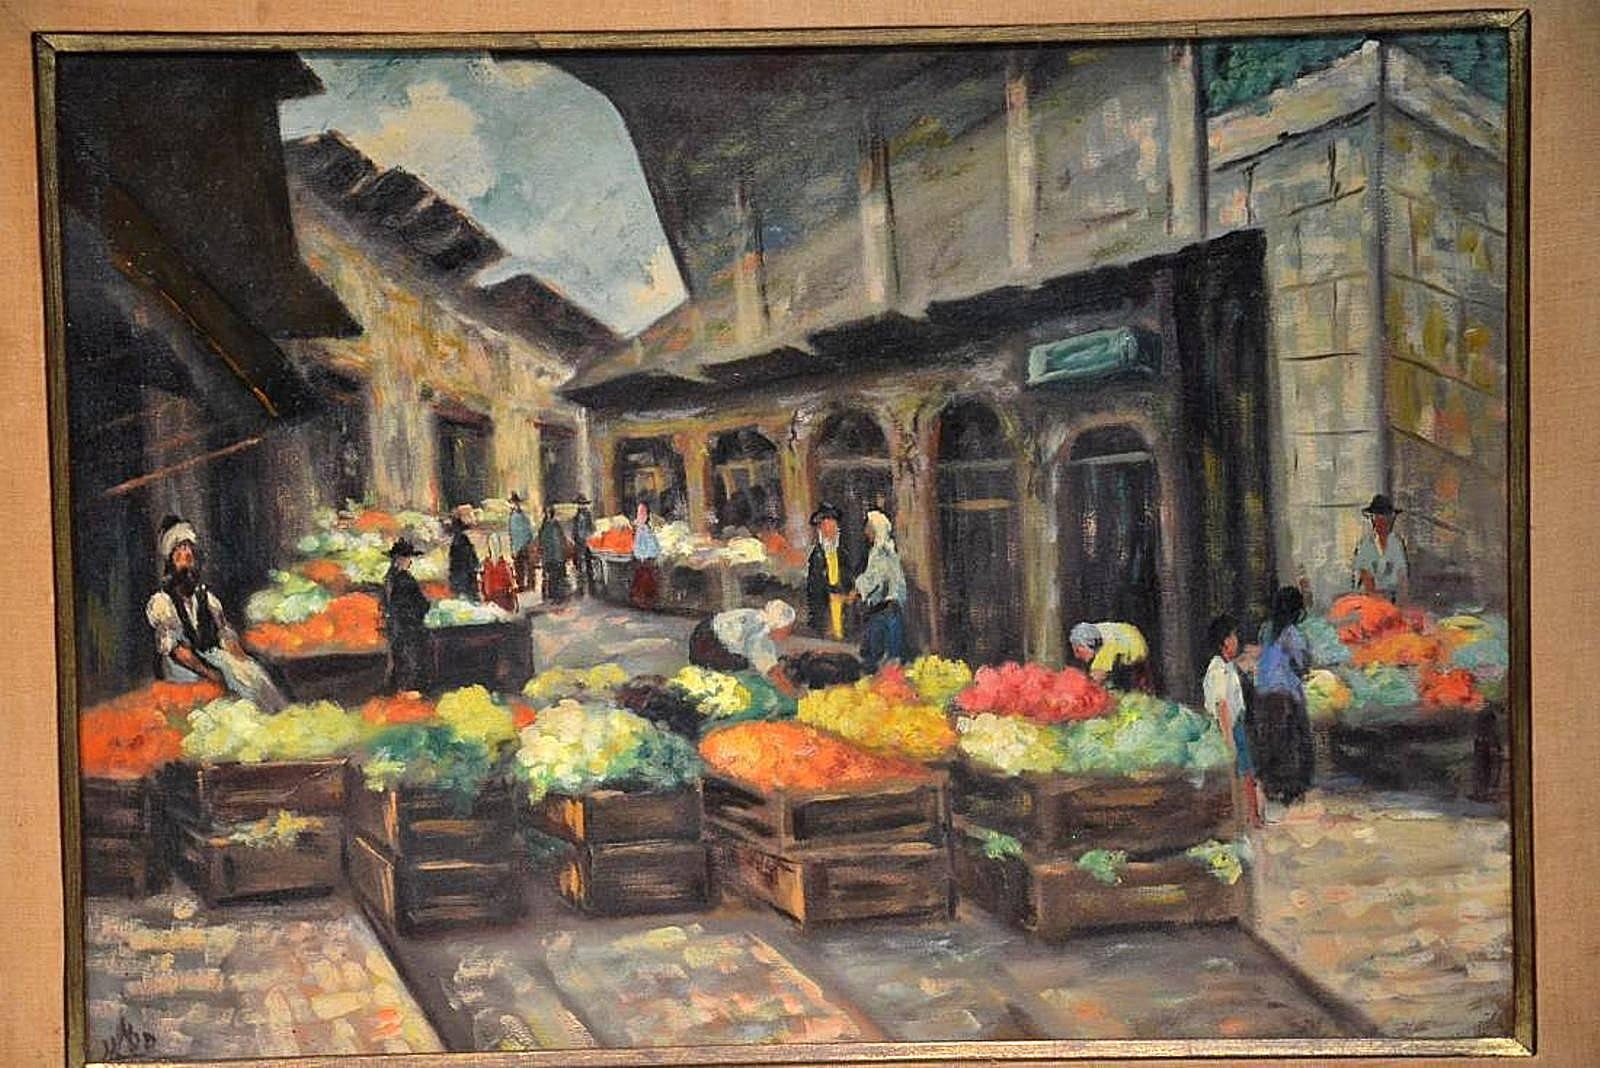 19 X 27 inches without frame

Oil painting by the Kabbalist Rabbi Yehuda Leon Patilon.
Oil on canvas, signed: Patilon.
A scene in the old Shuk (Souq) Market in Jerusalem, Machne Yehudah.
Kabbalist Yehuda Leon Patilon (died Cheshvan 1974) was known